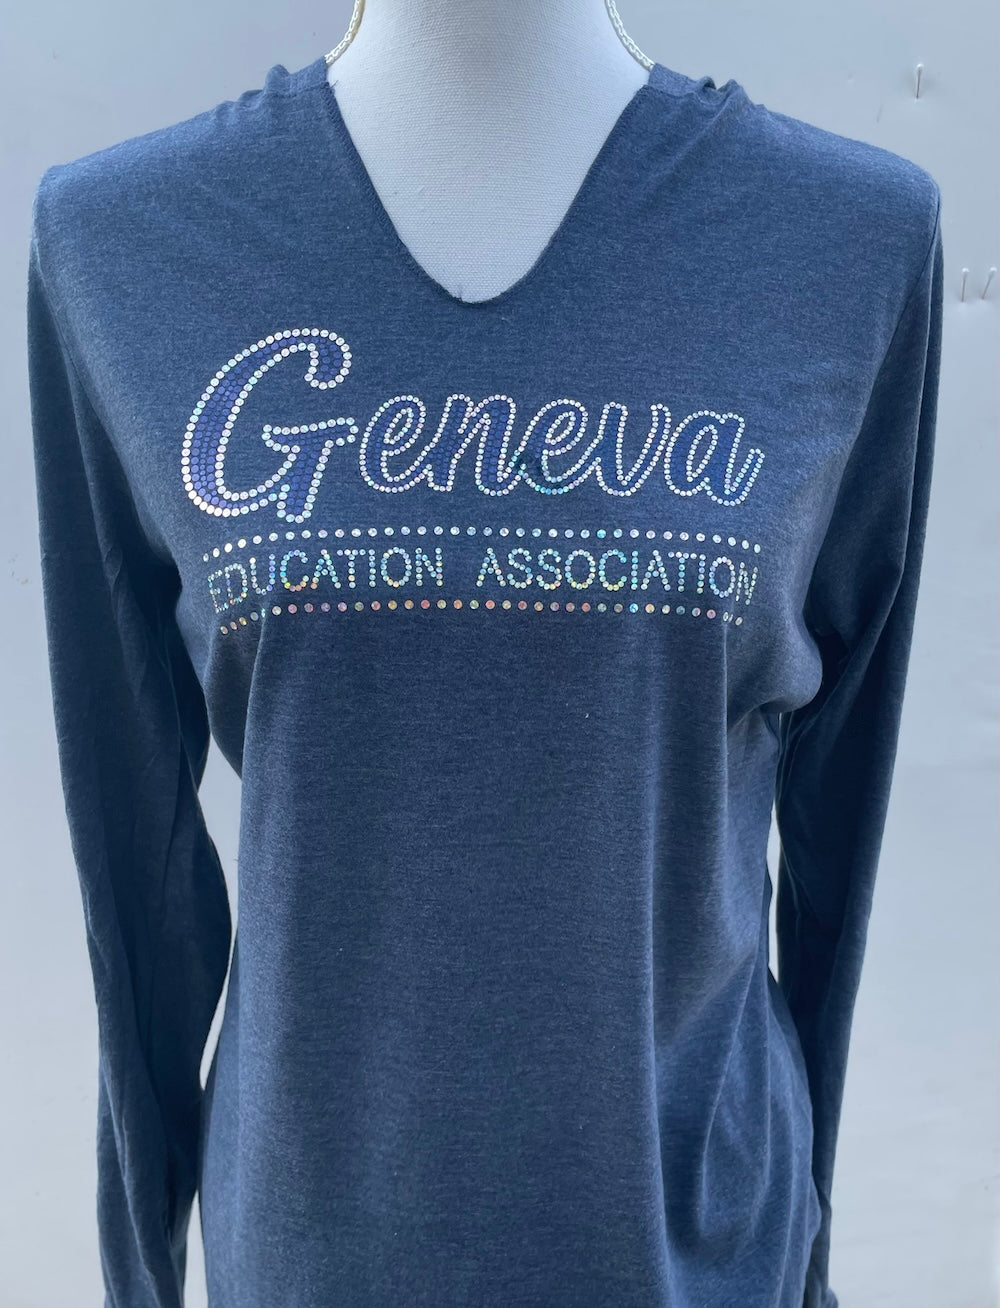 GEA Ladies Hooded T-shirt with Sparkle Imprint Options